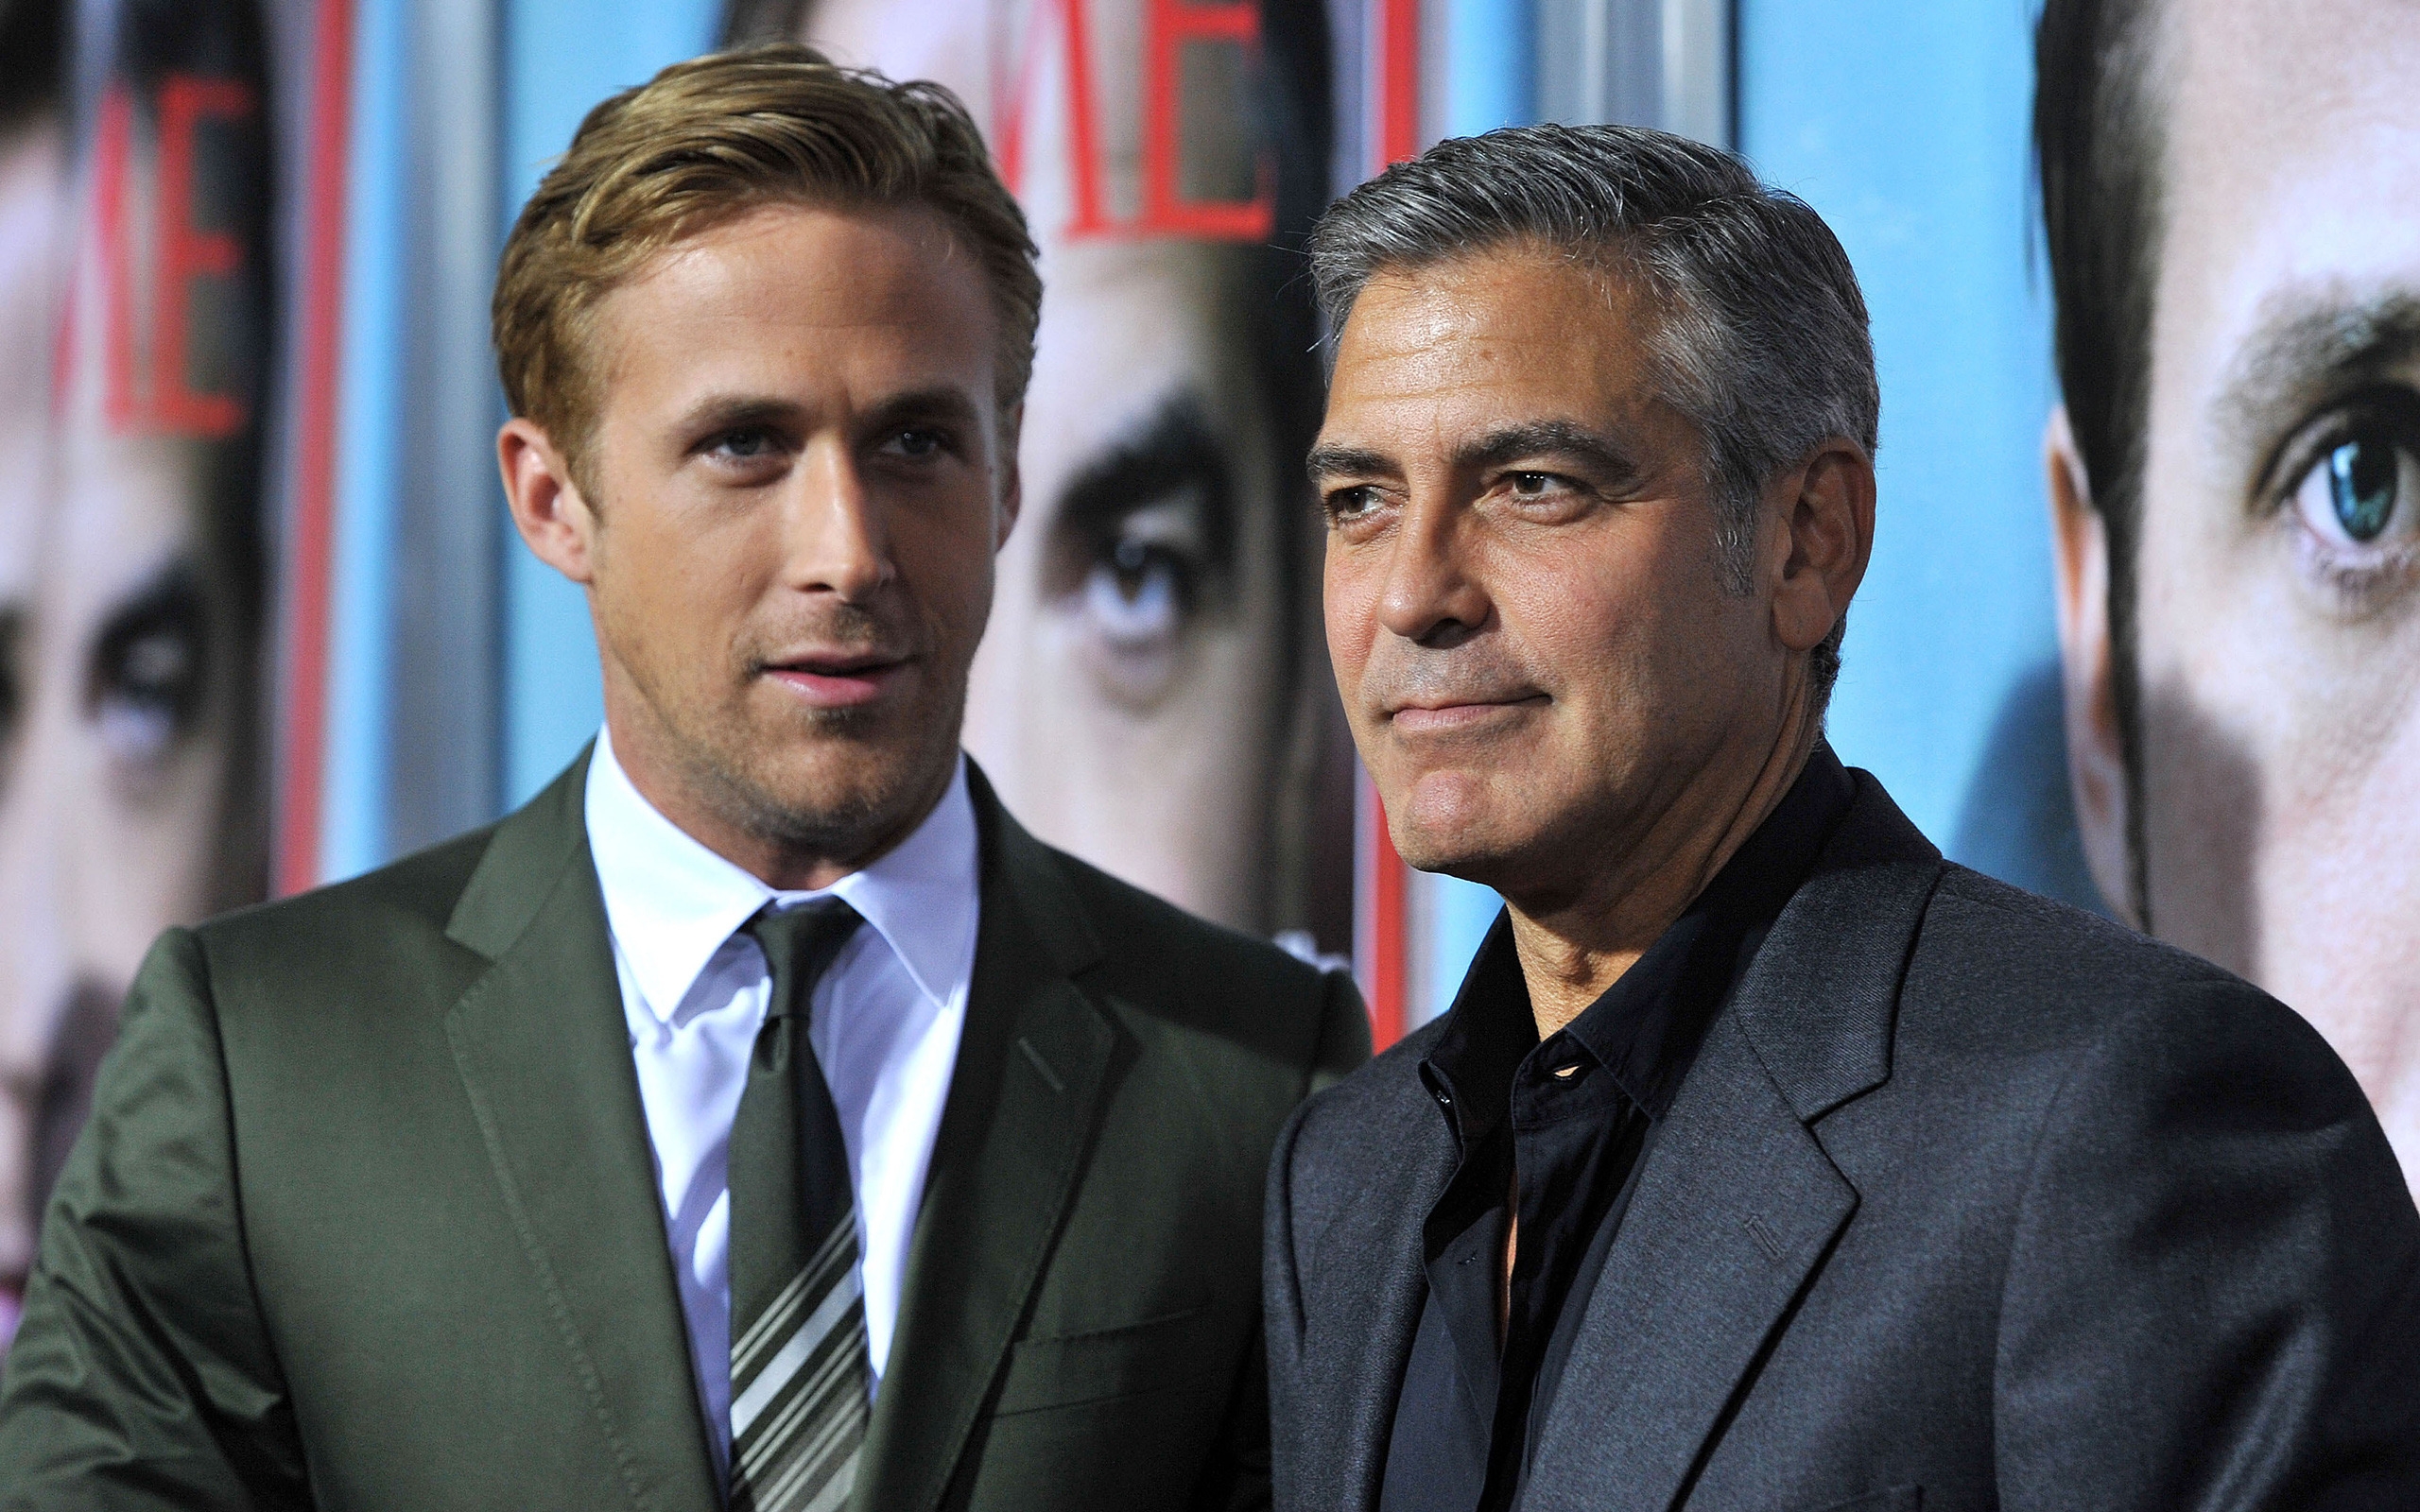 George Clooney and Ryan Gosling for 2560 x 1600 widescreen resolution